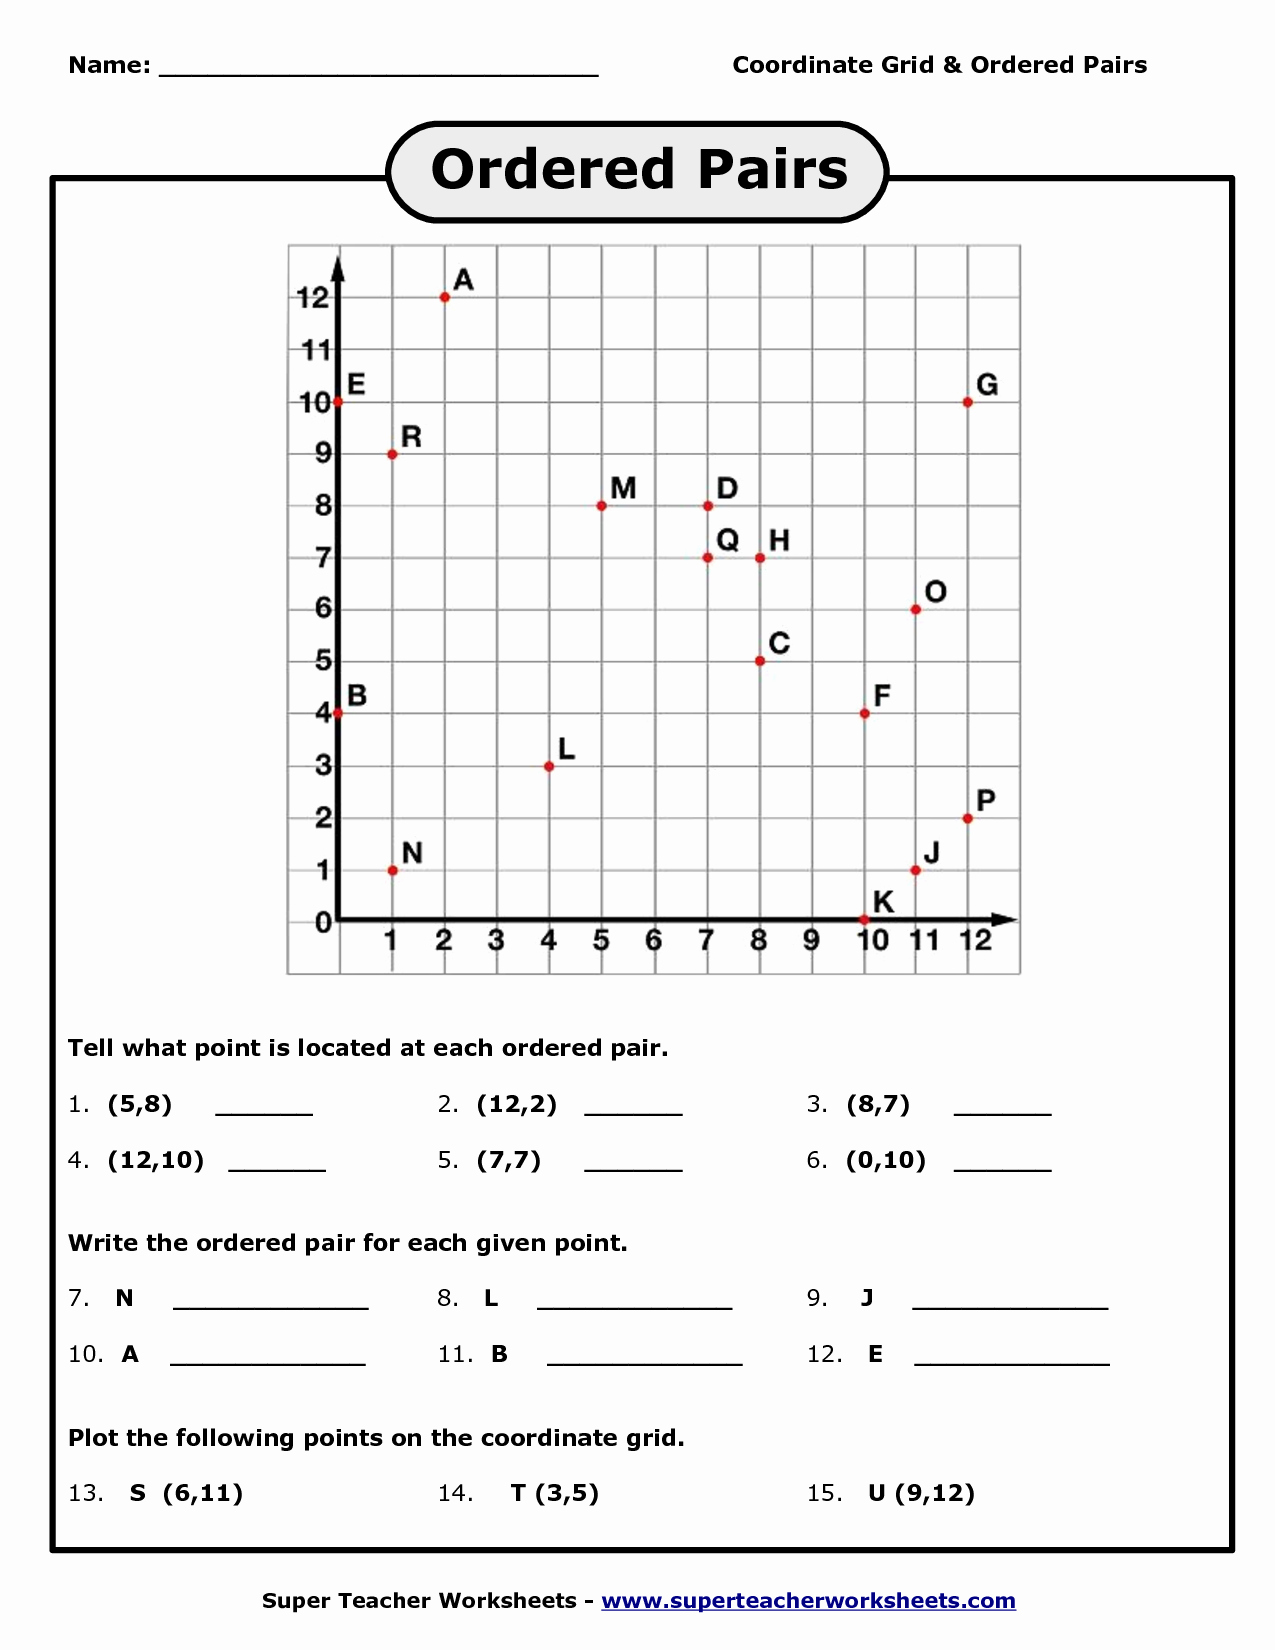 Coordinate Grids Worksheets 5th Grade Unique 5th Grade Math Worksheets Google Search